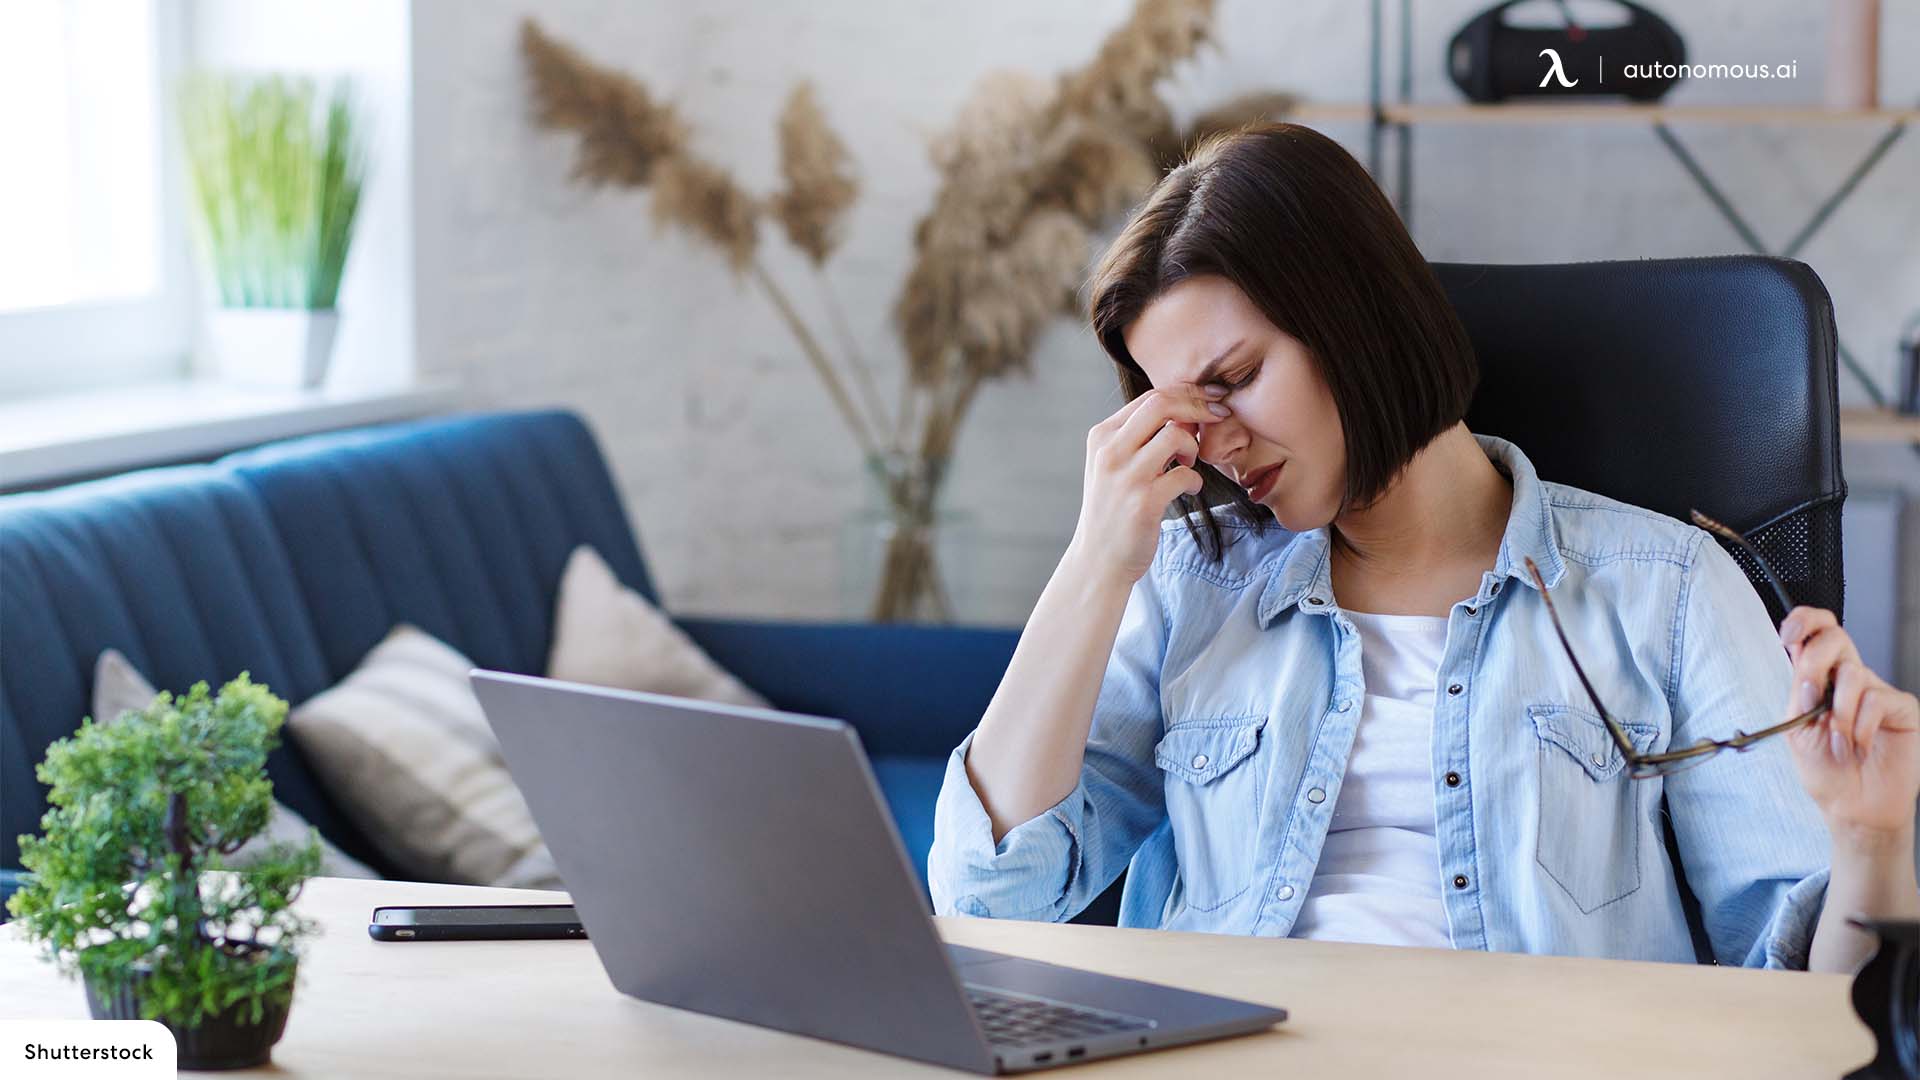 How to Recognize Signs of Burnout at Work While Remotely